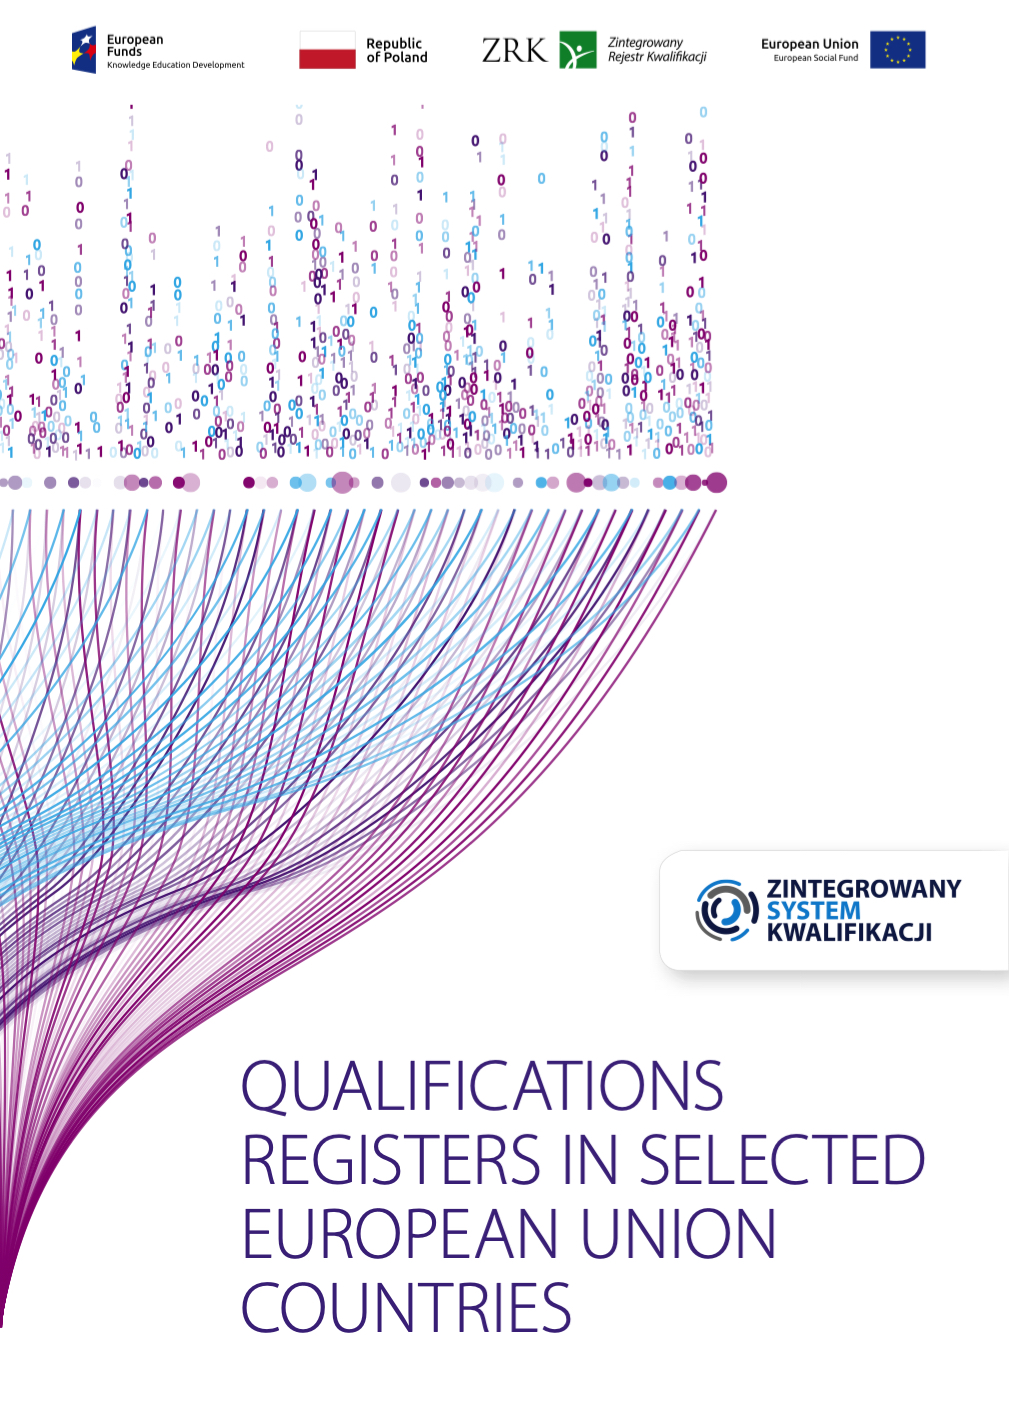 Qualification Registers in selected European Union countries